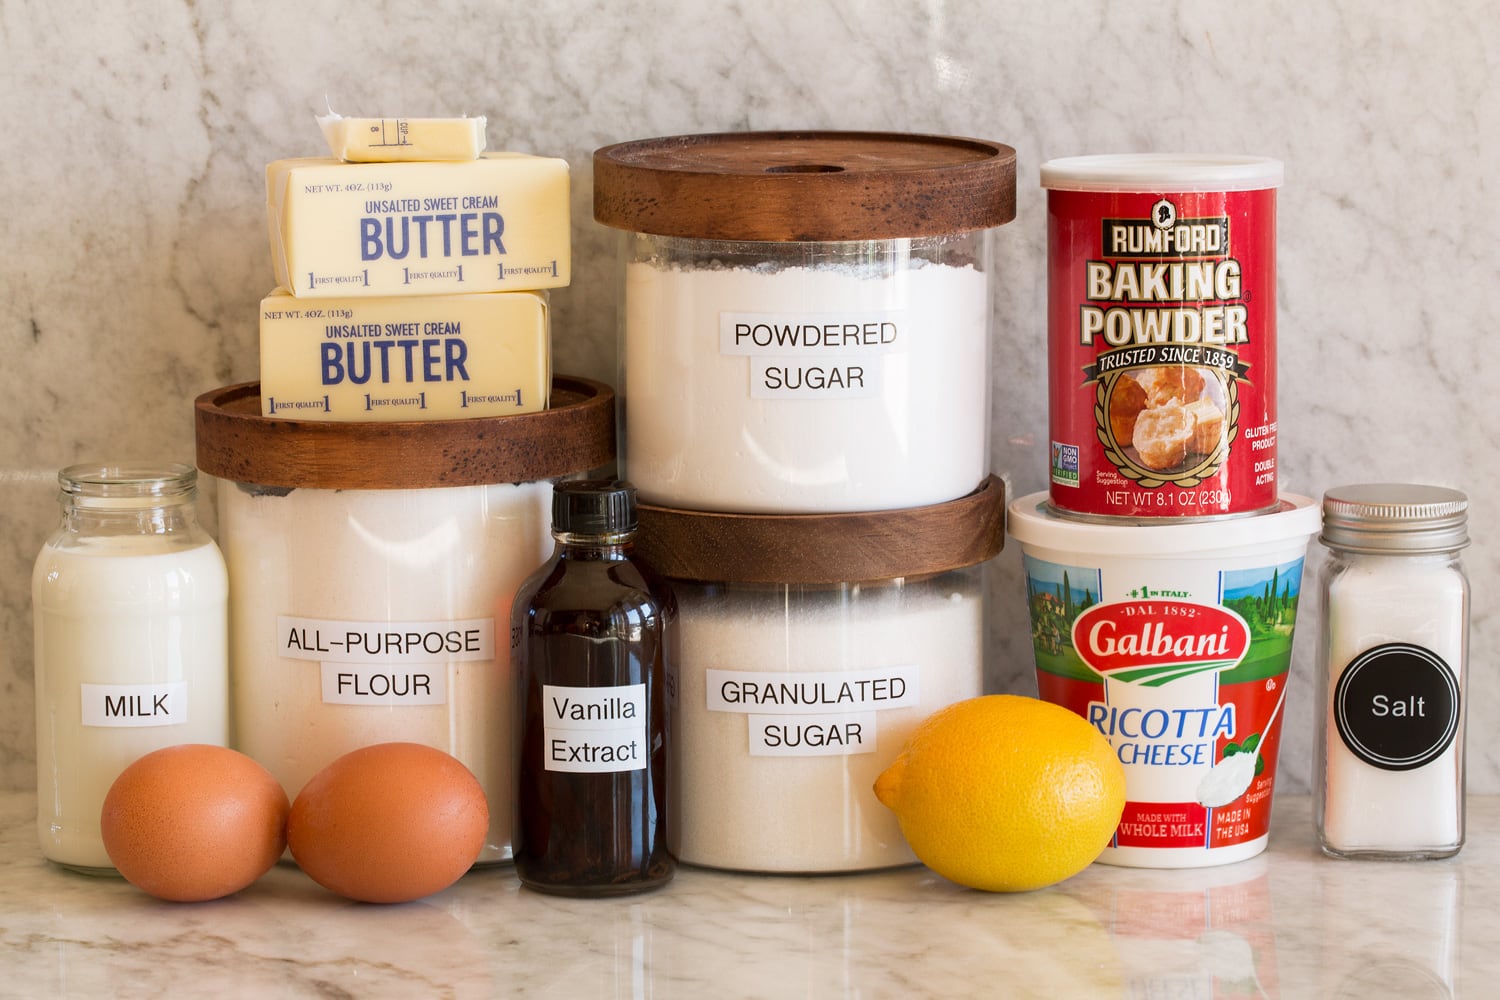 Ingredients needed to make ricotta cookies shown.